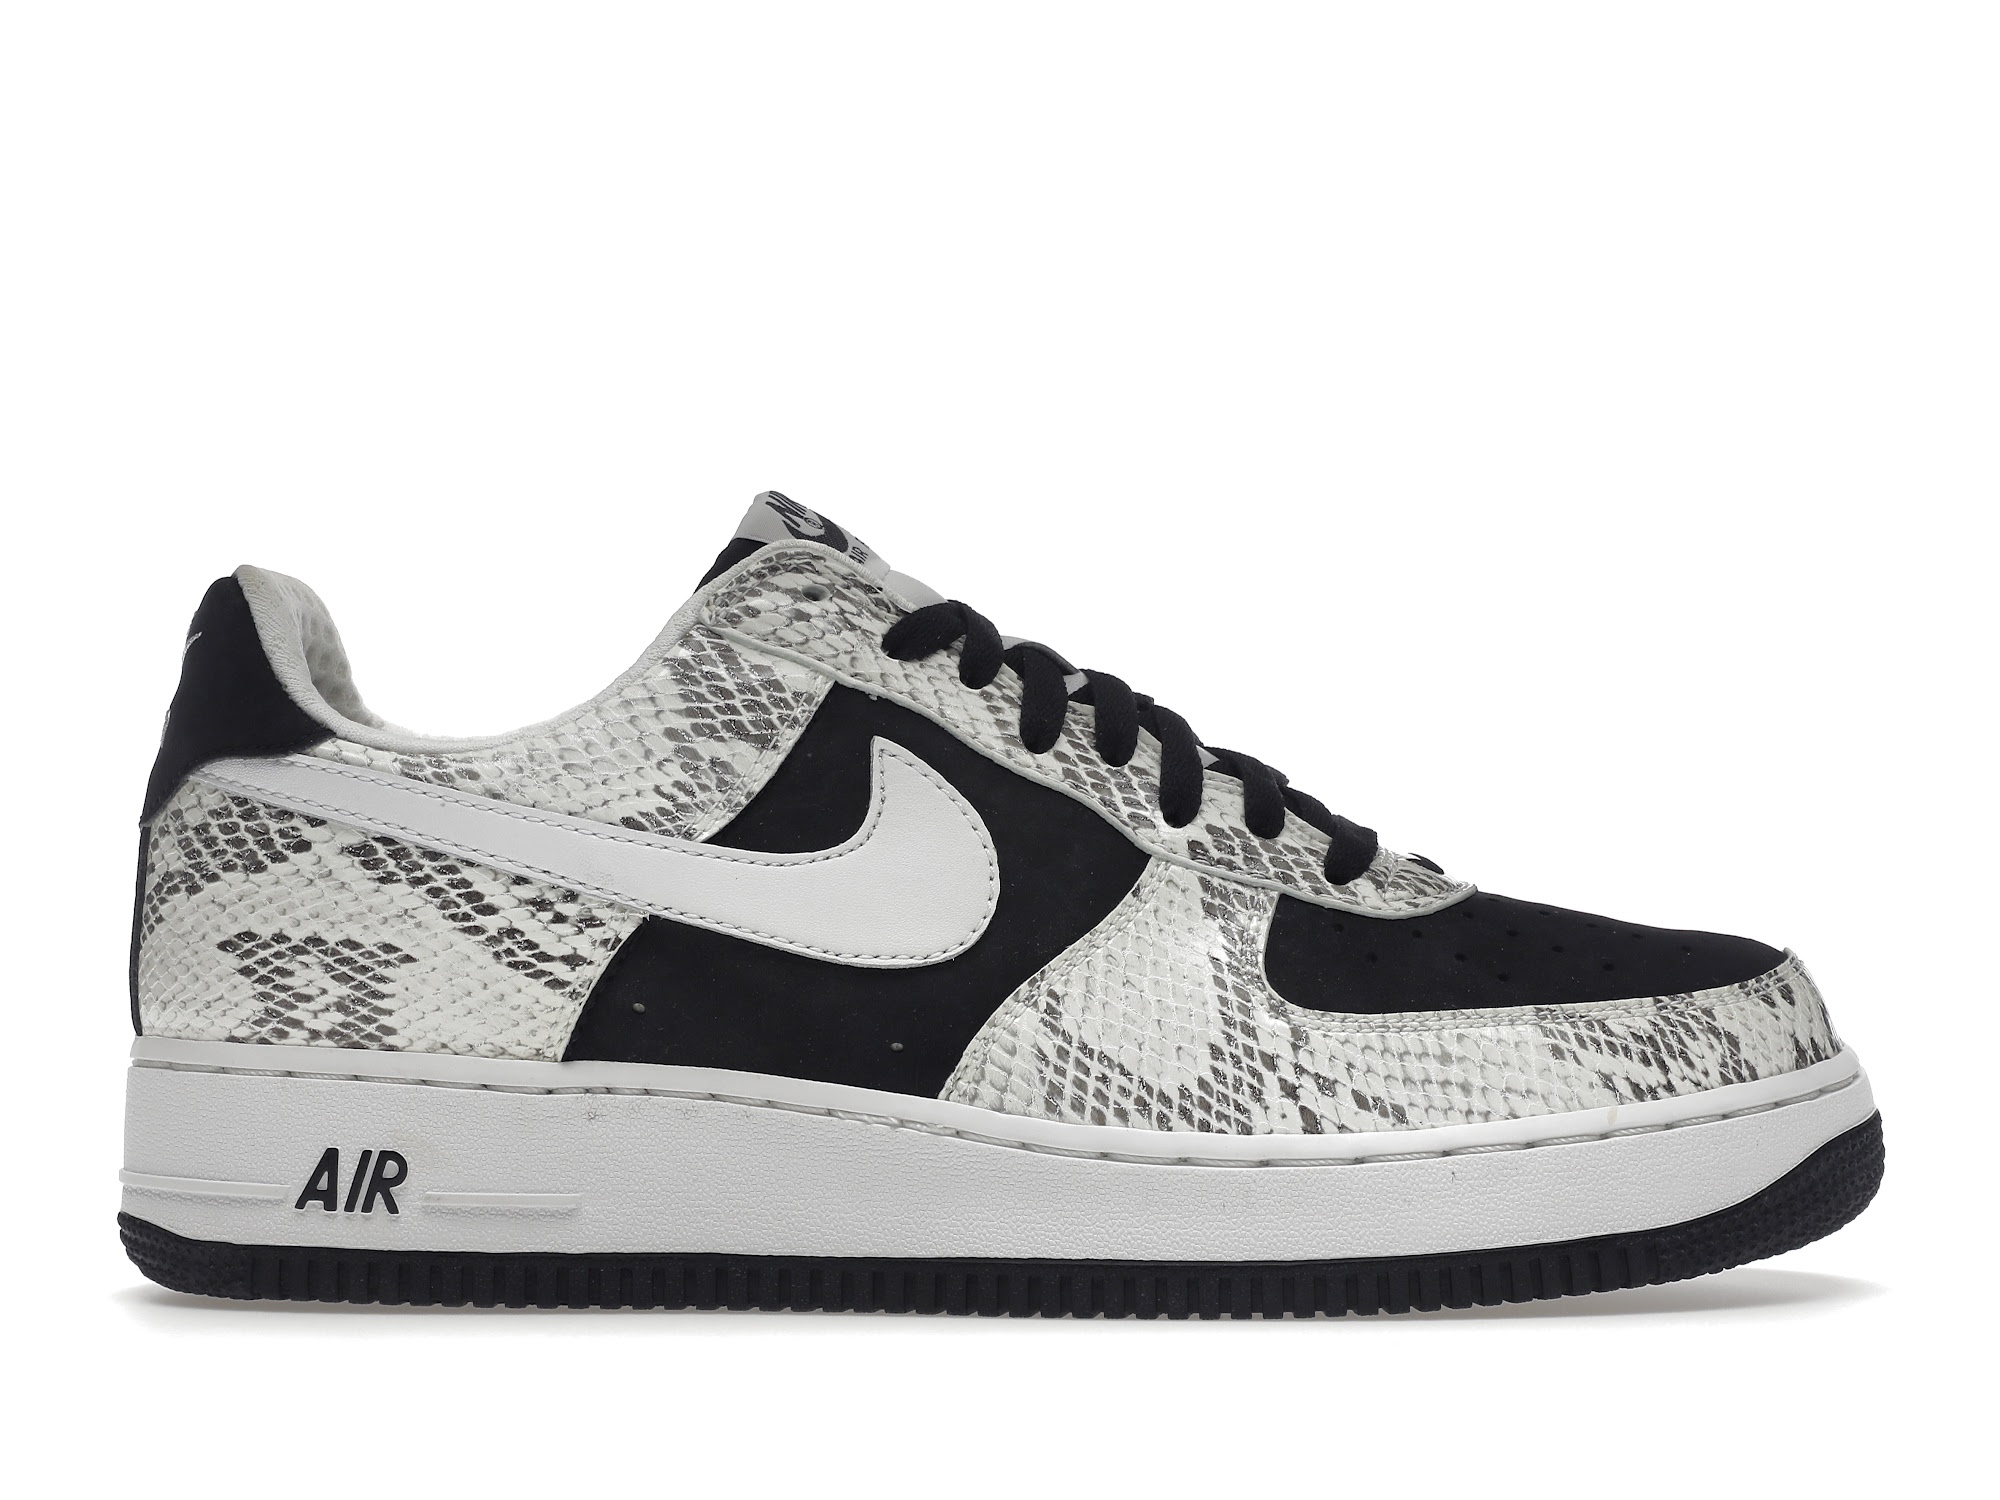 Nike Air Force 1 Low Snakeskin Cocoa Men's - 312945-011 - US